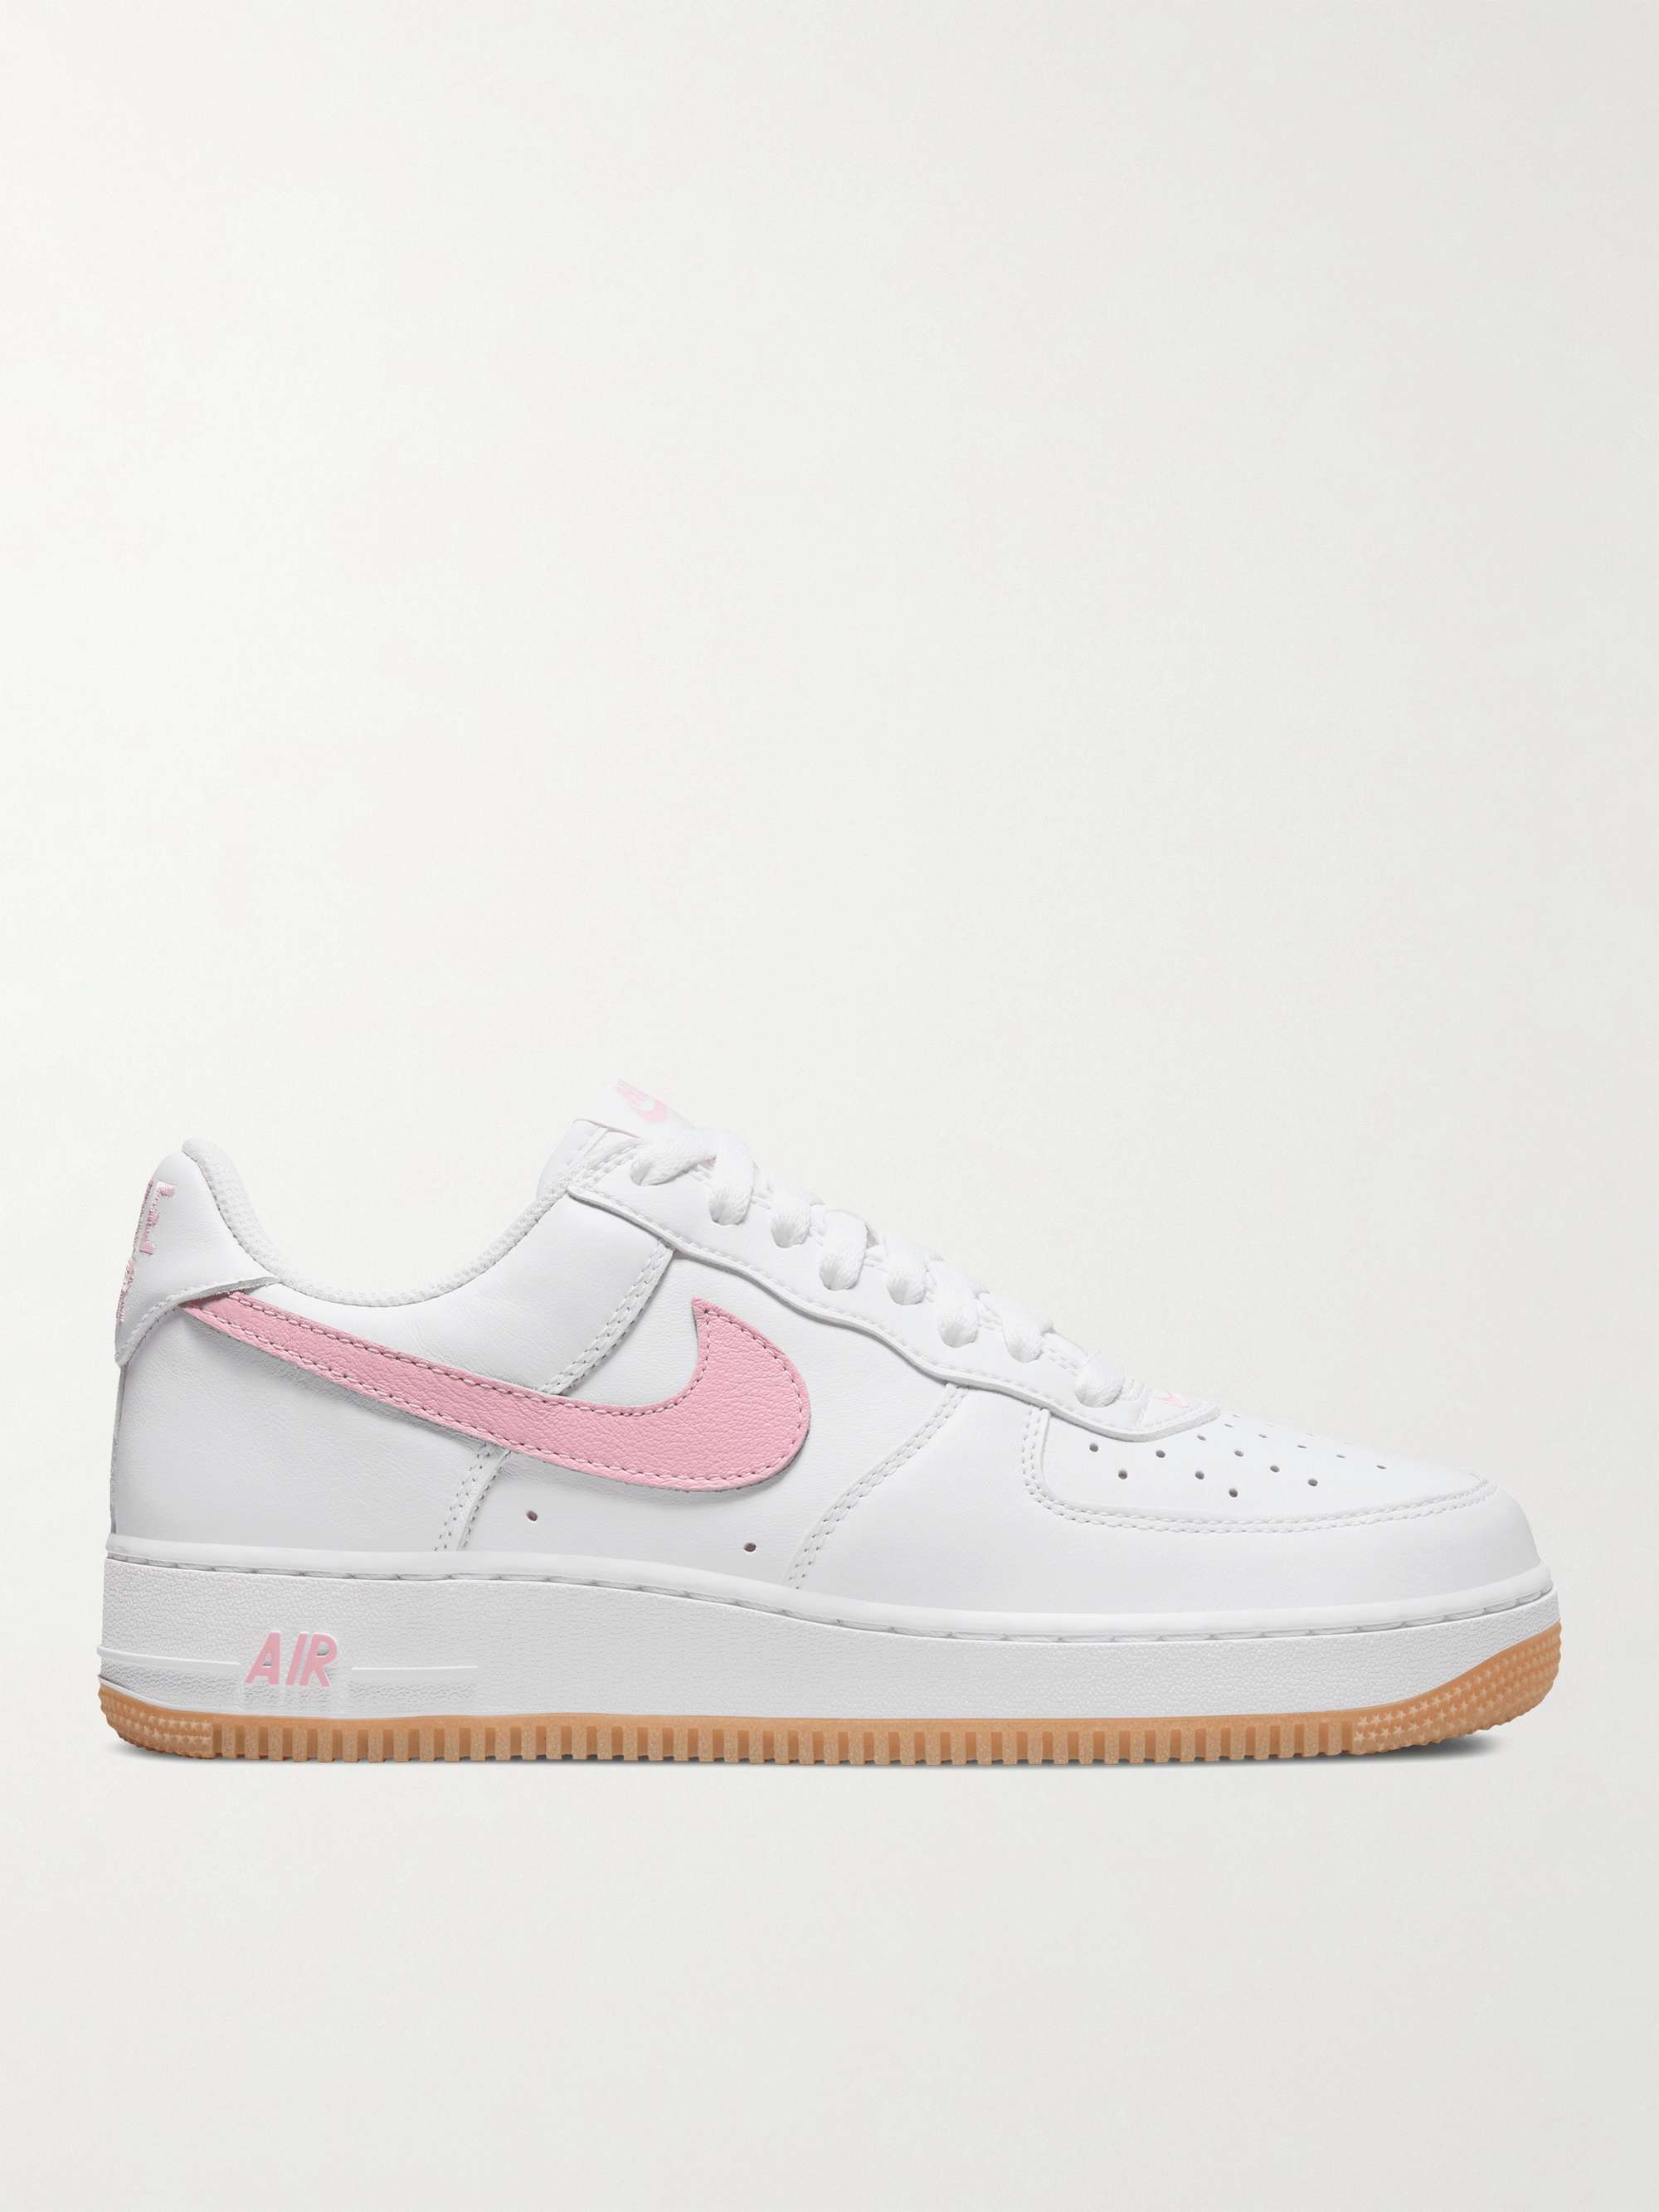 NIKE Air Force 1 Low Retro Leather Sneakers | MR PORTER